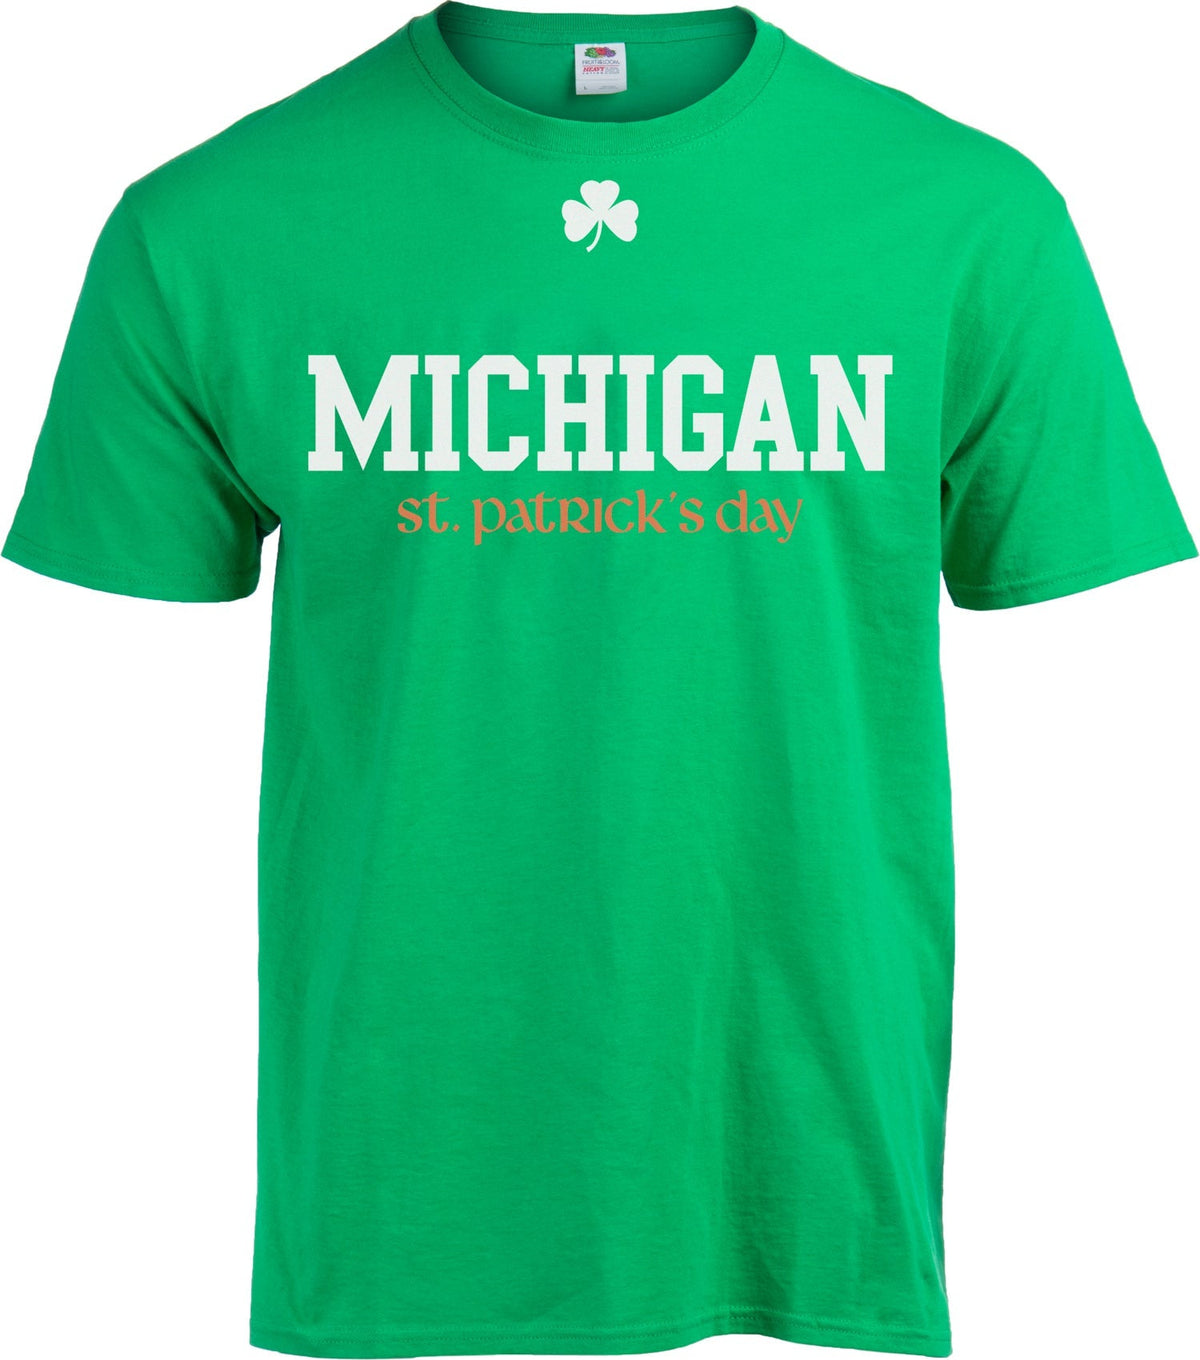 Michigan St. Patrick's Day - Michigan Pride Party T-shirt - Kid's/Youth